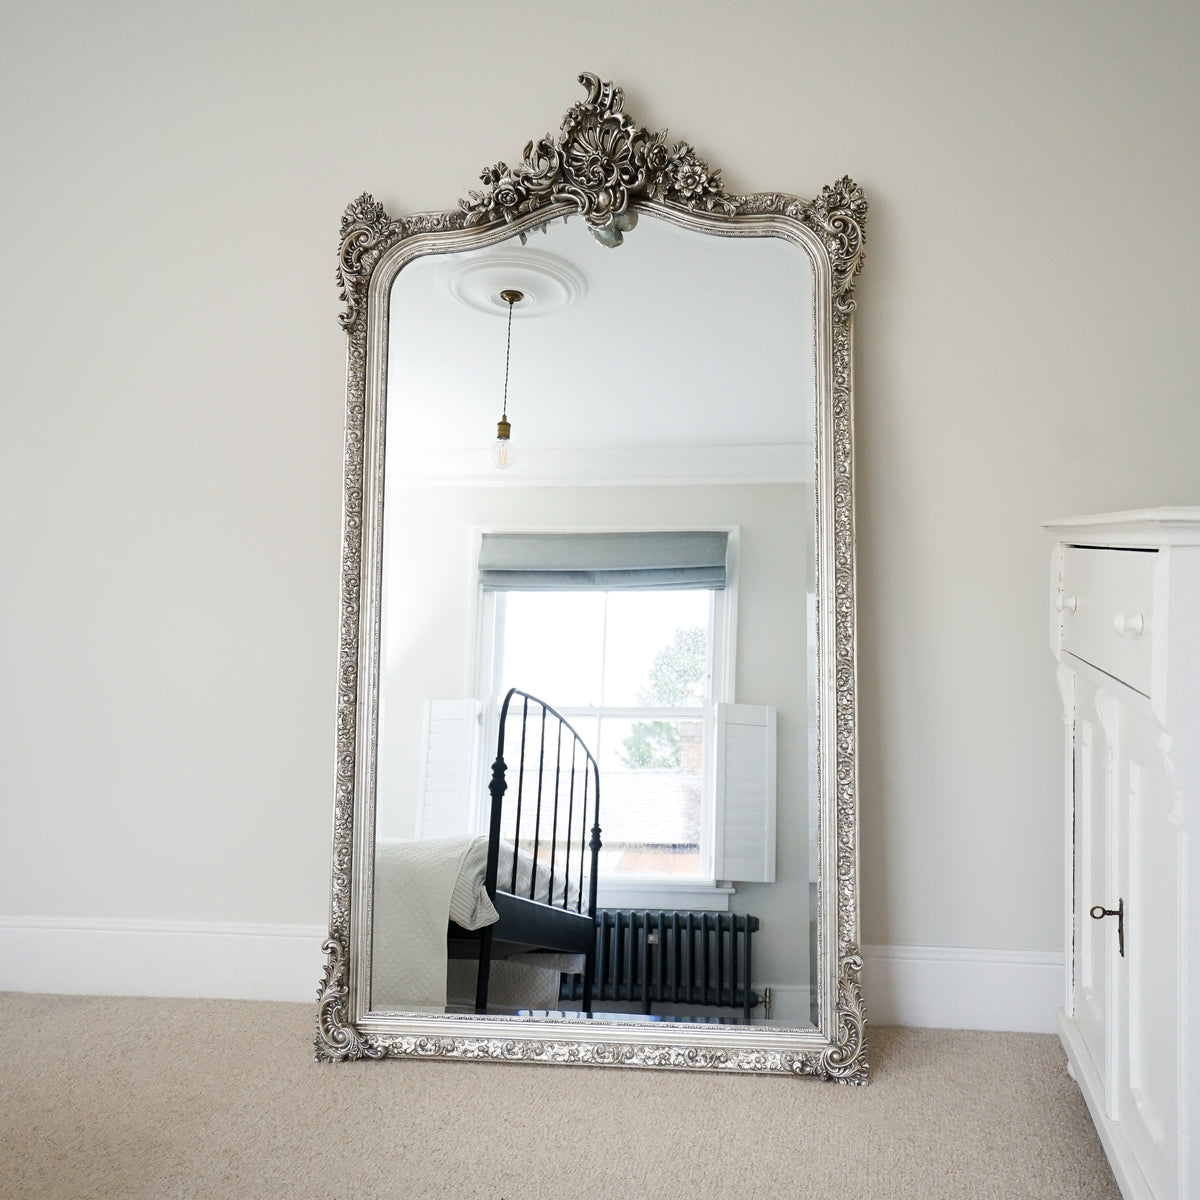 Silver Arched Ornate Full Length Mirror leaning against wall